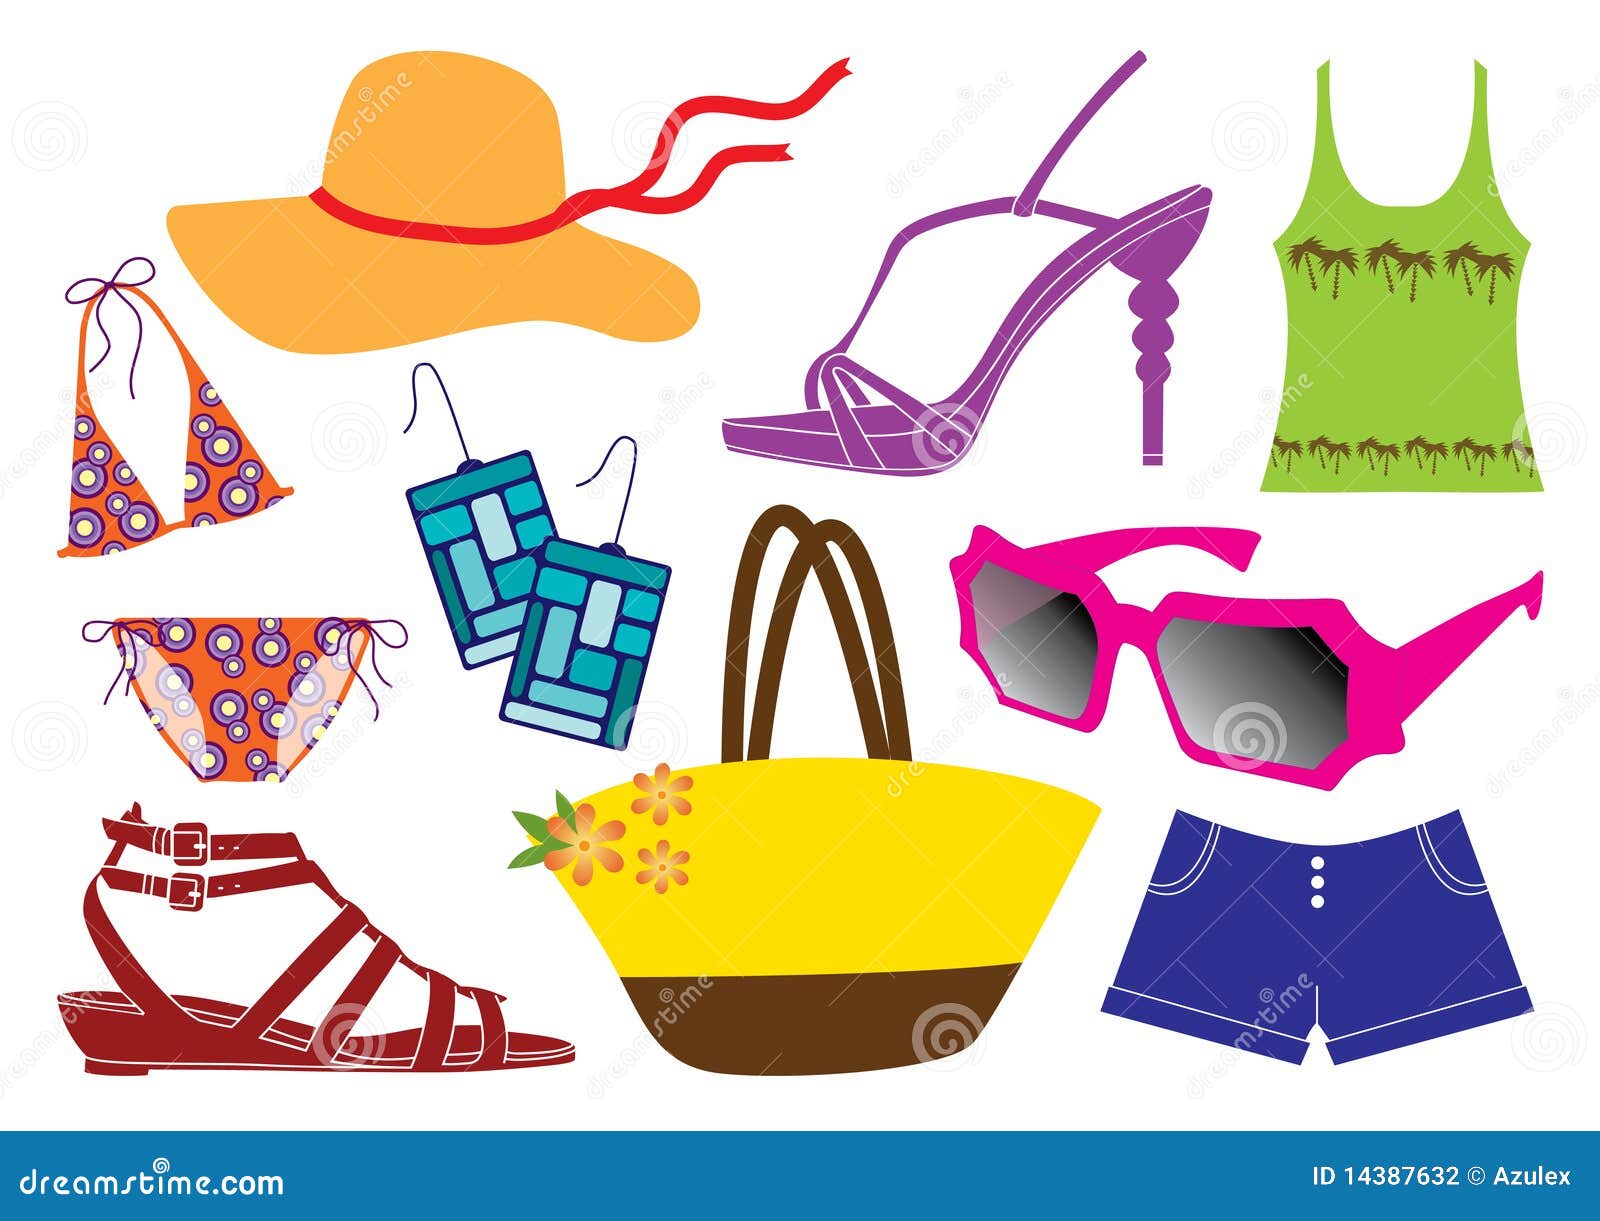 clipart clothes and shoes - photo #20